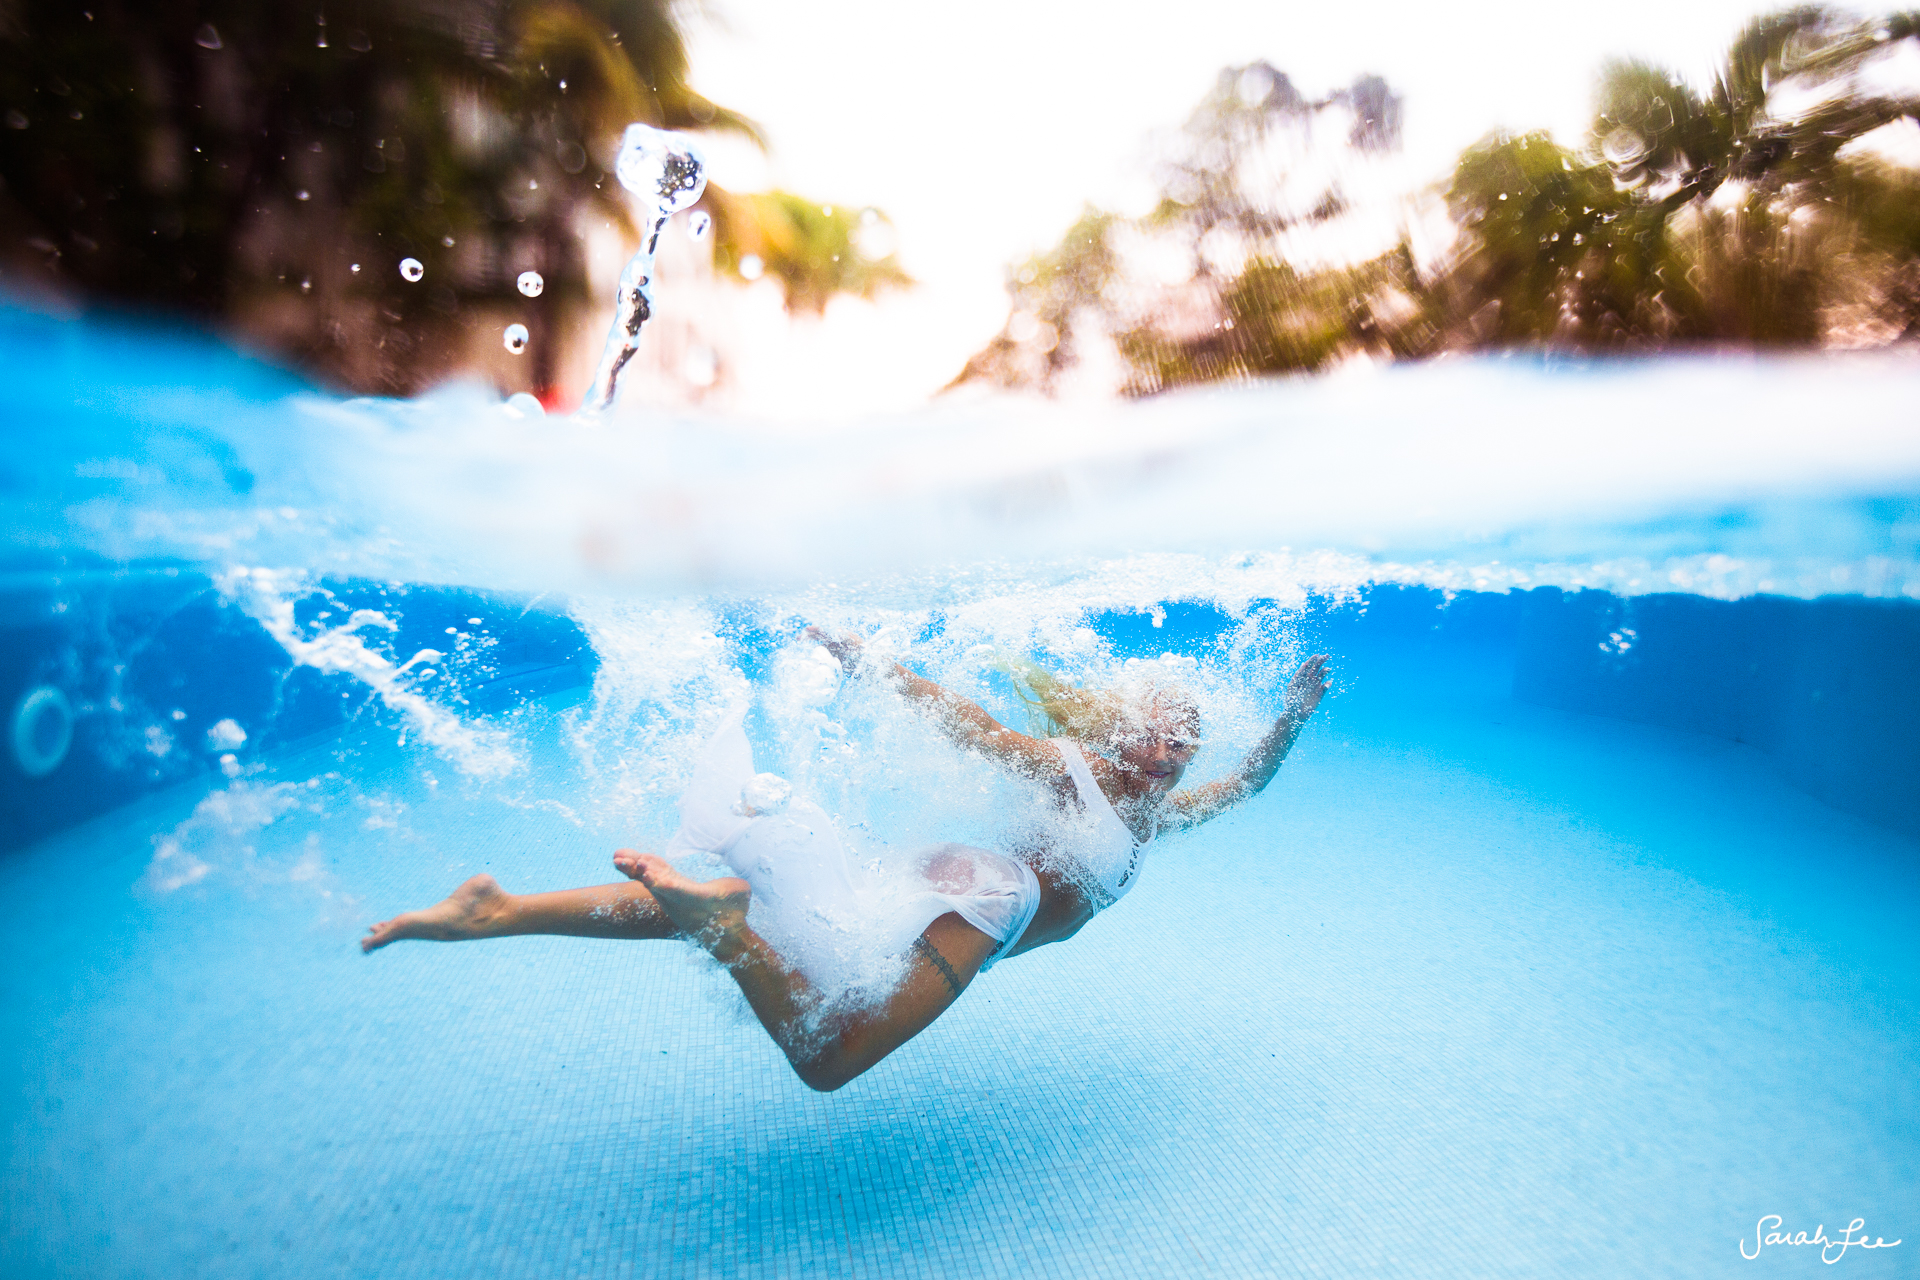  Shooting with the Outex in a pool can be so much fun! This was taken on a wide angle lens + flat port. See how the model is in focus as well as the rain drop! 